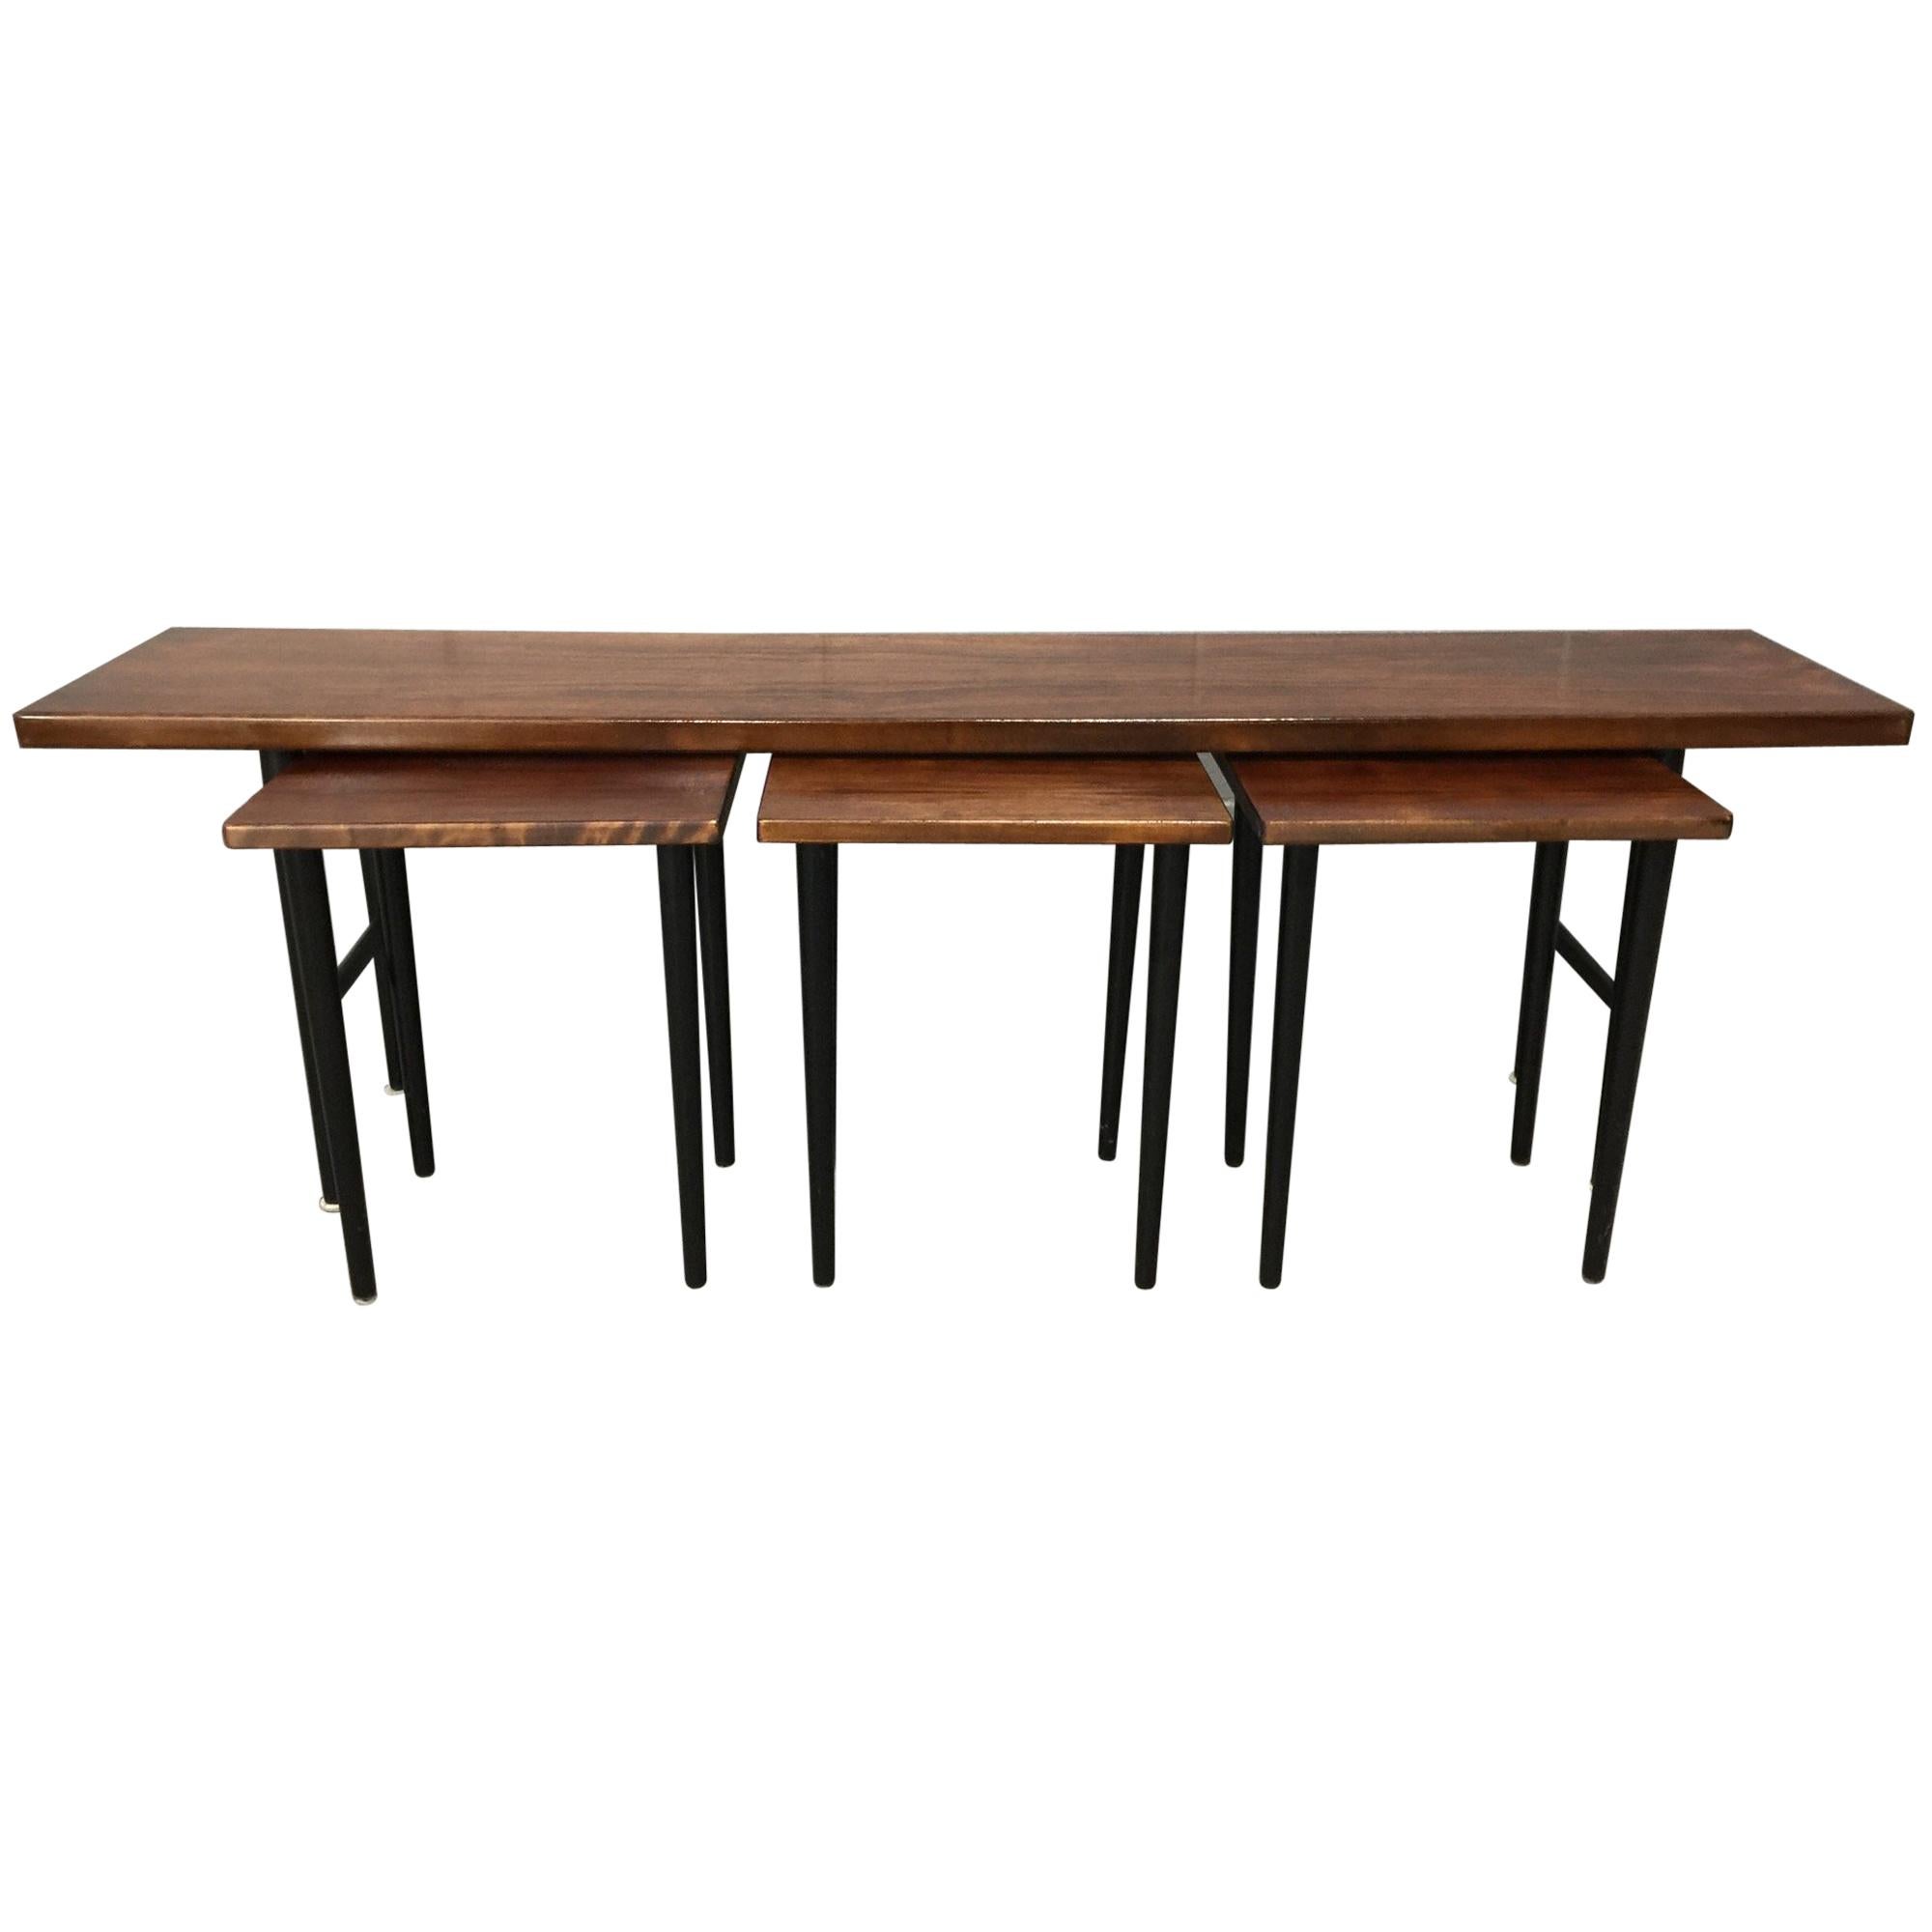 Long Rosewood Table with 3 Small Nesting Tables